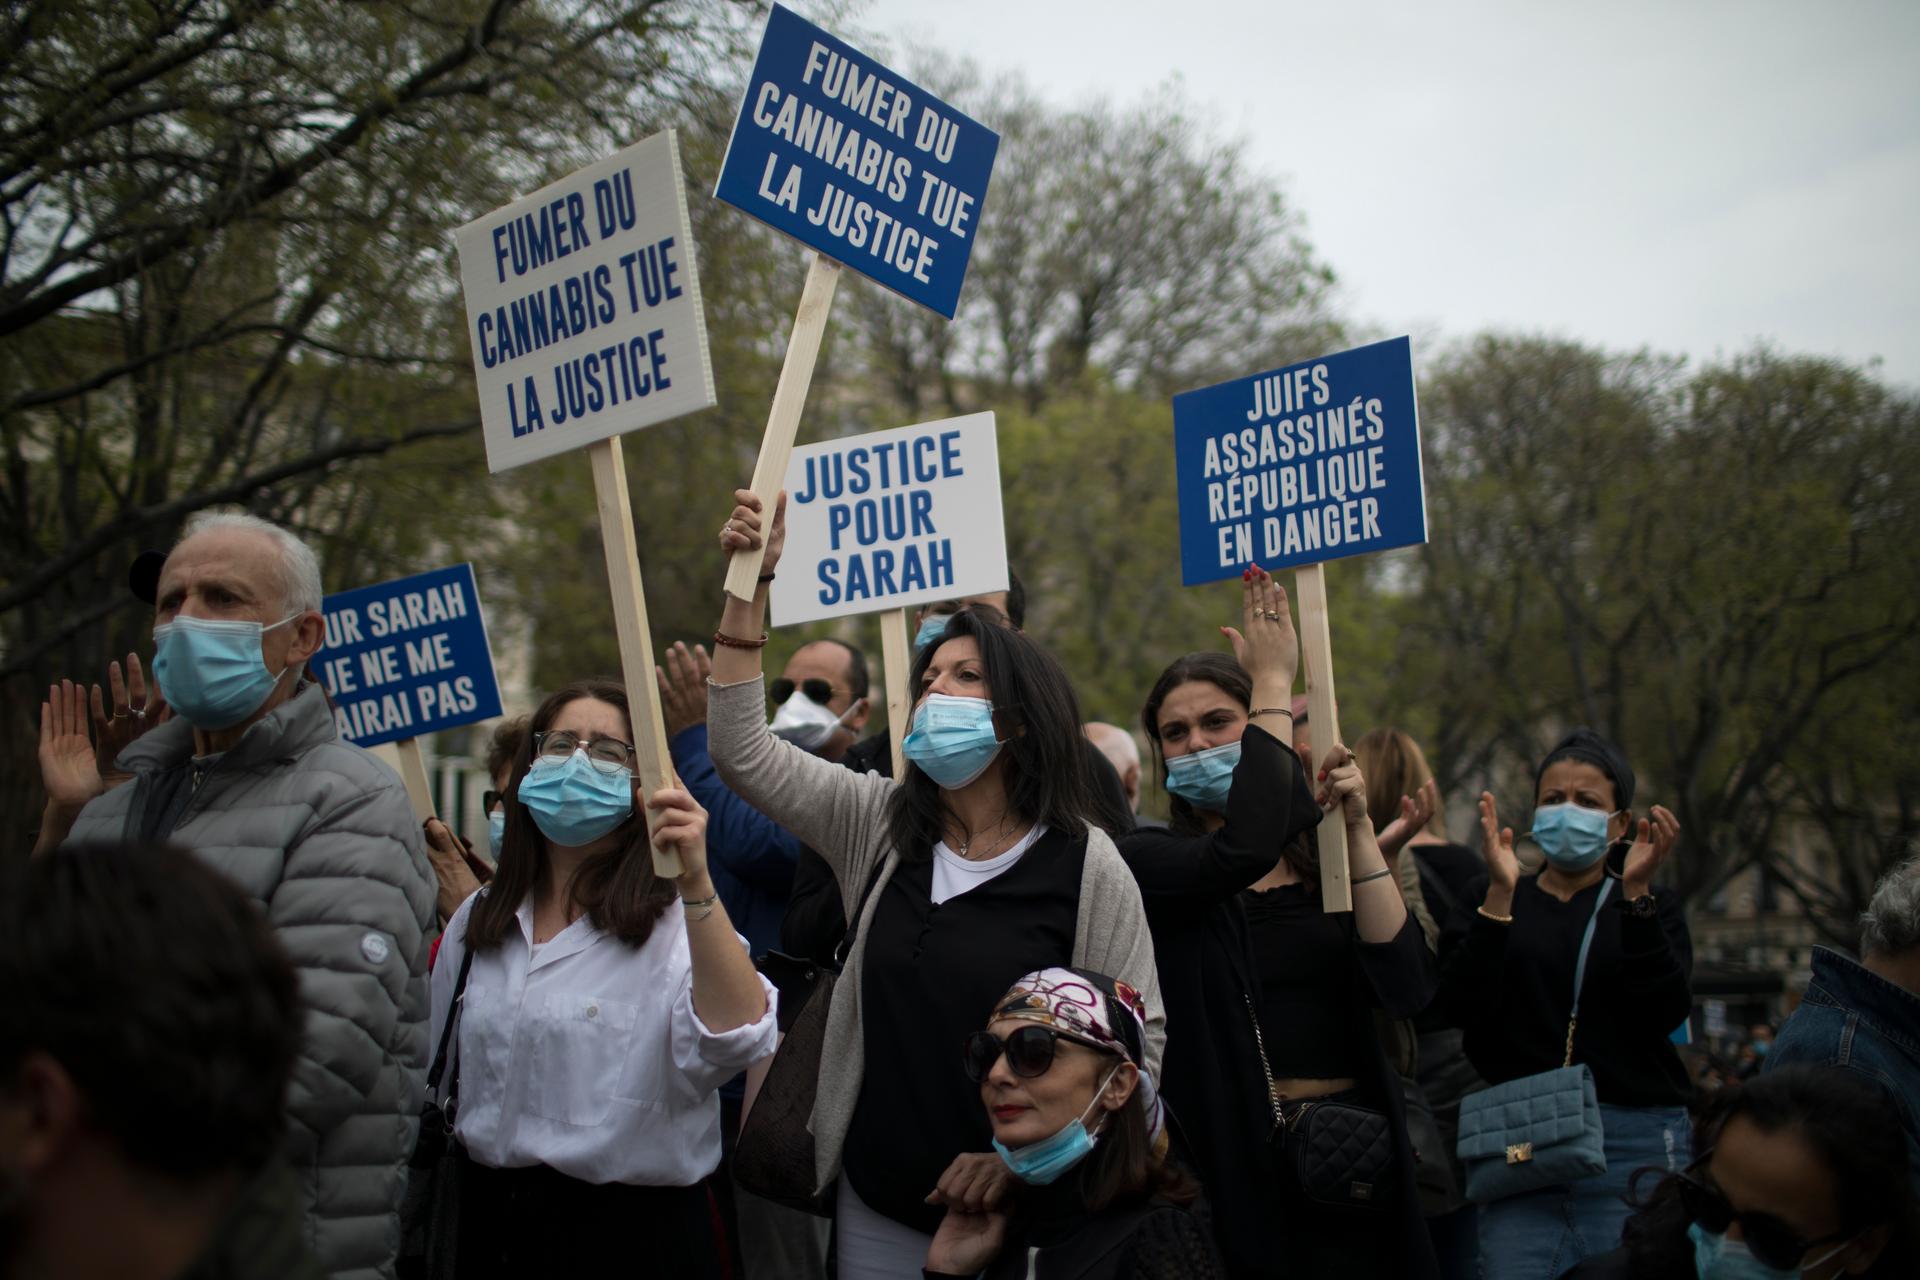 Protesters hold blue and white signs in French that read 